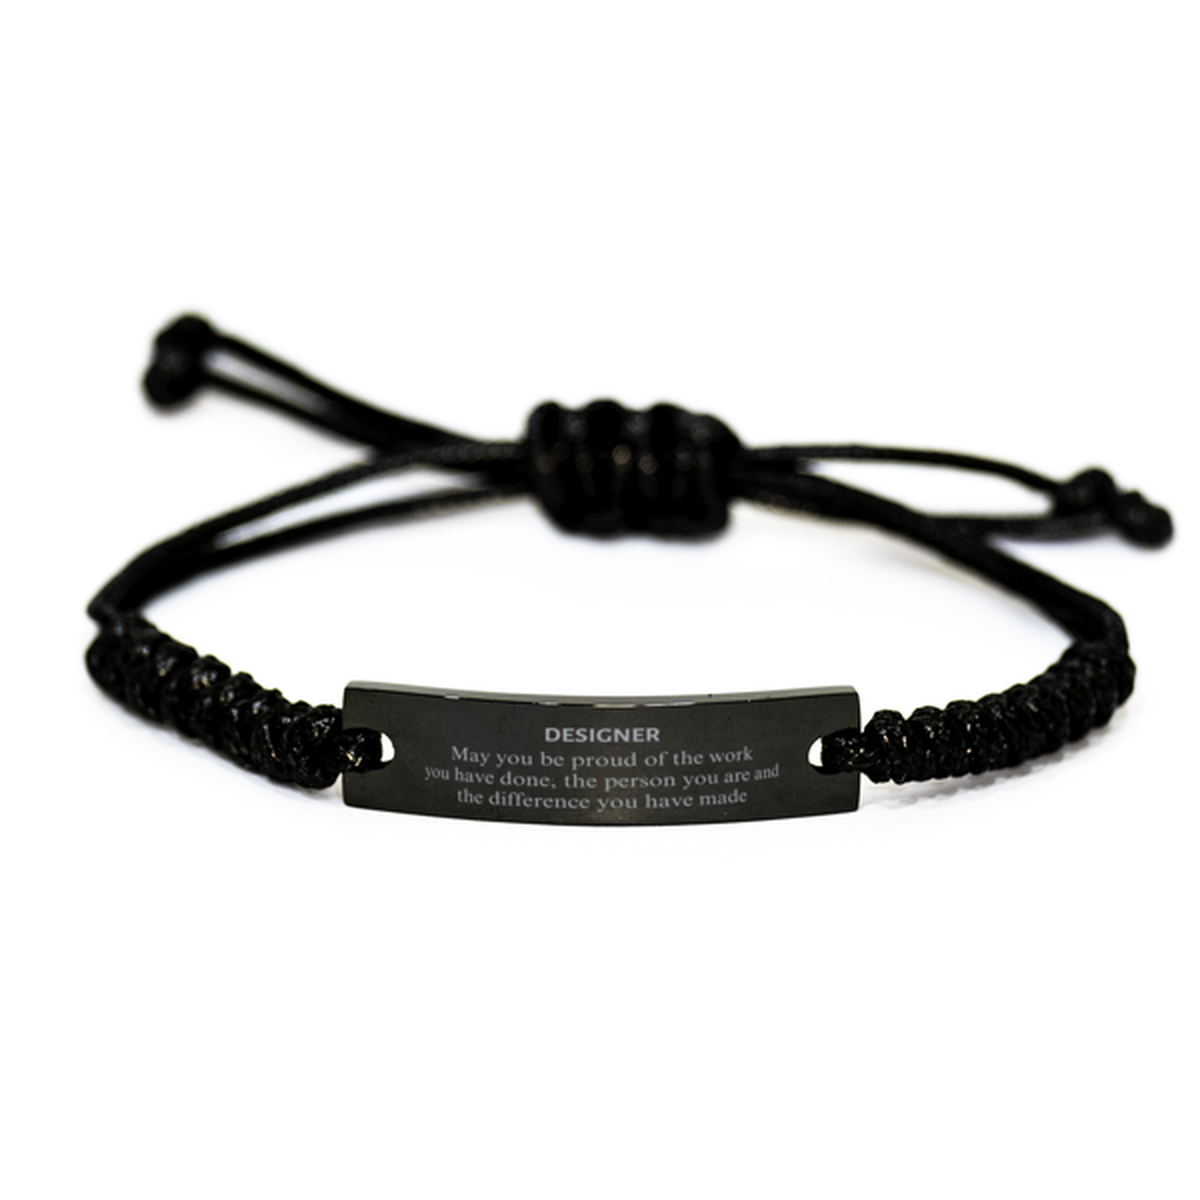 Designer May you be proud of the work you have done, Retirement Designer Black Rope Bracelet for Colleague Appreciation Gifts Amazing for Designer